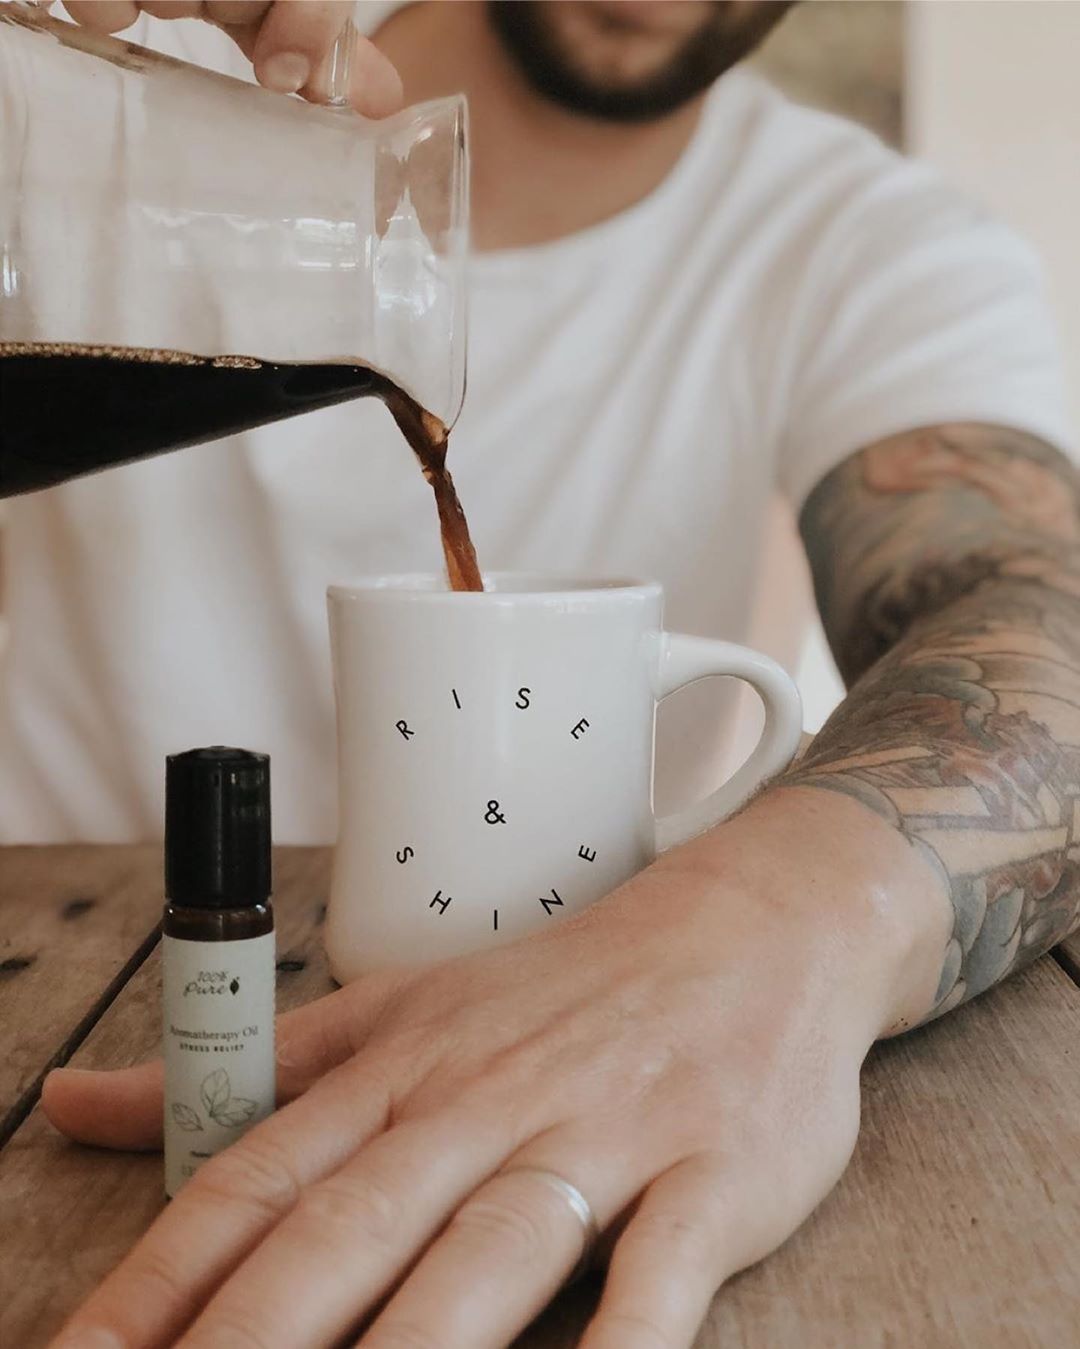 100% PURE - Aaaand, we’re back to Monday... ✨☕️ Rise and shine, #cleanbeautycommunity! Who’s starting the week with our Aromatherapy Oil?

#KeepCalmStayPure #aromatherapy #aromatherapyoil #cleanbeauty...